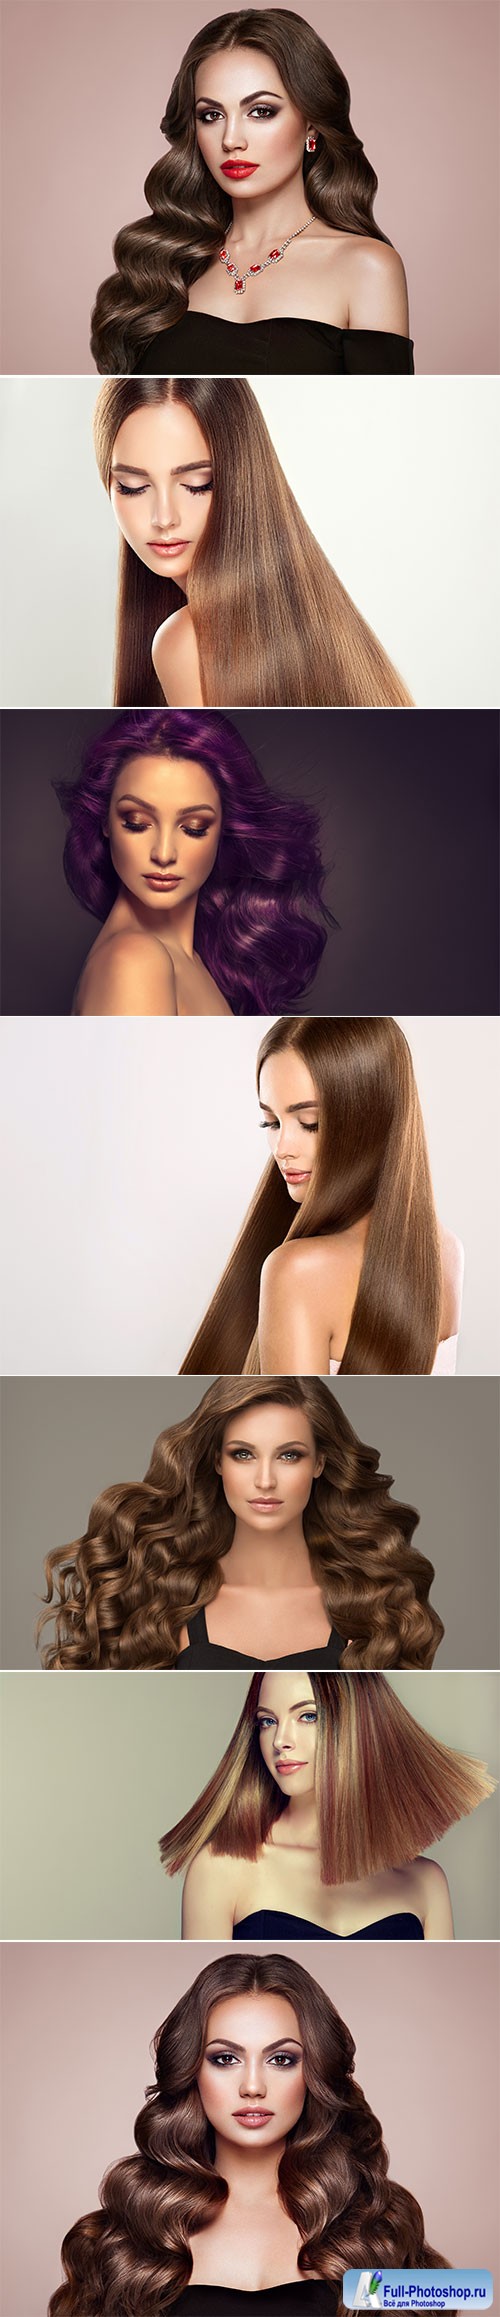 Luxury girls with beautiful hair and makeup